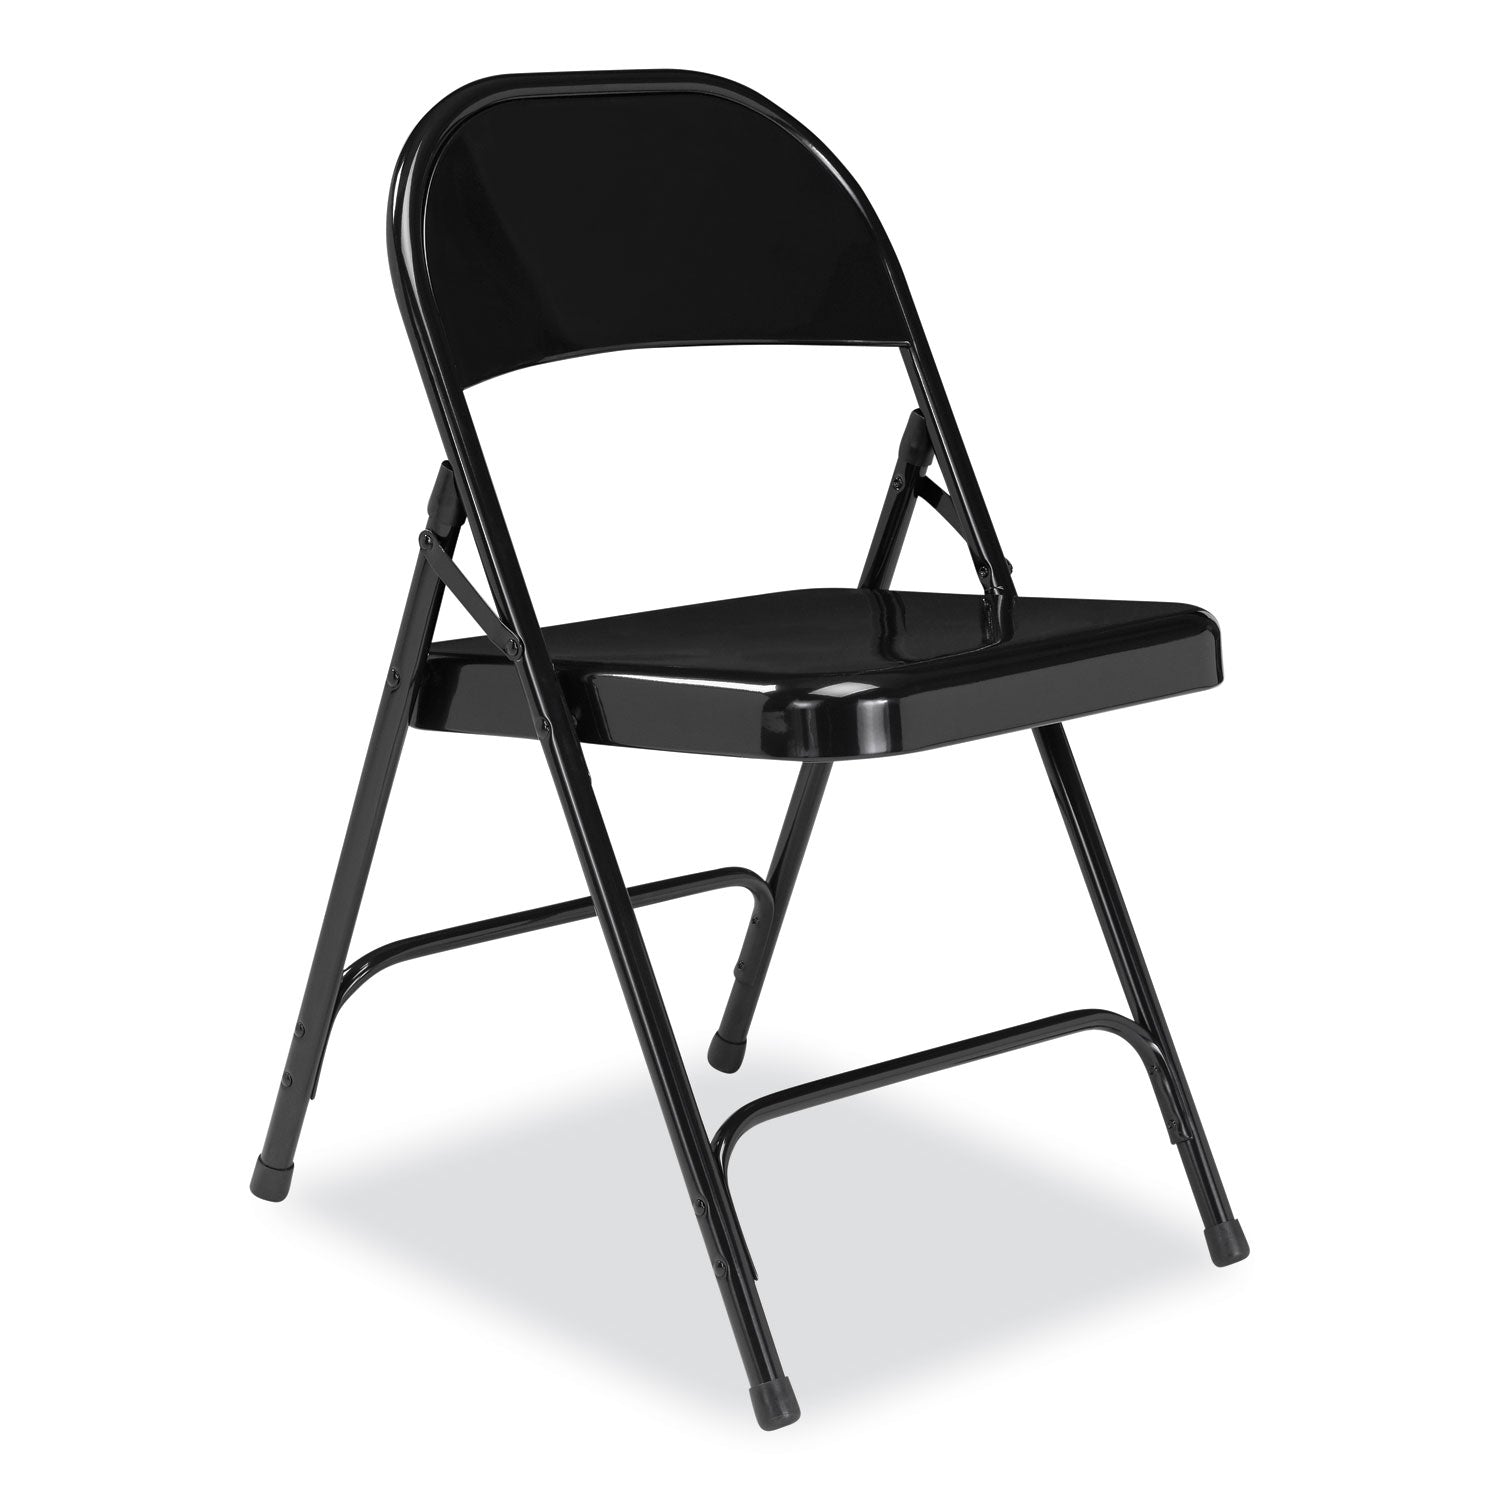 50-series-all-steel-folding-chair-supports-500-lb-1675-seat-height-black-seat-back-base-4-ctships-in-1-3-business-days_nps510 - 2